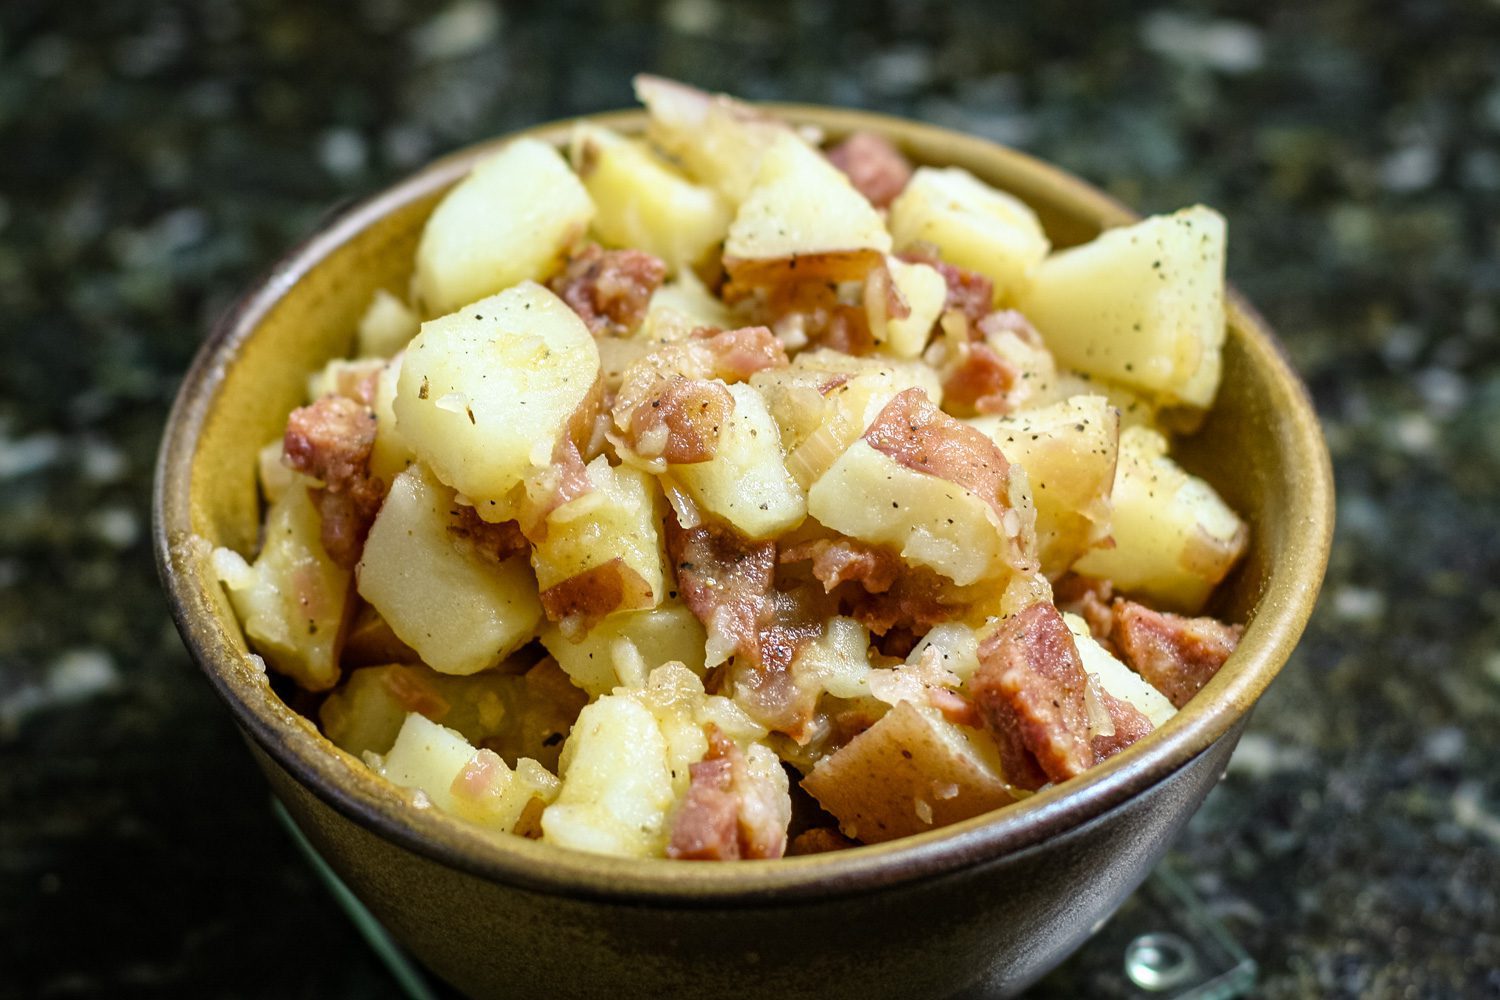 warm potato salad with sausage in a bowl